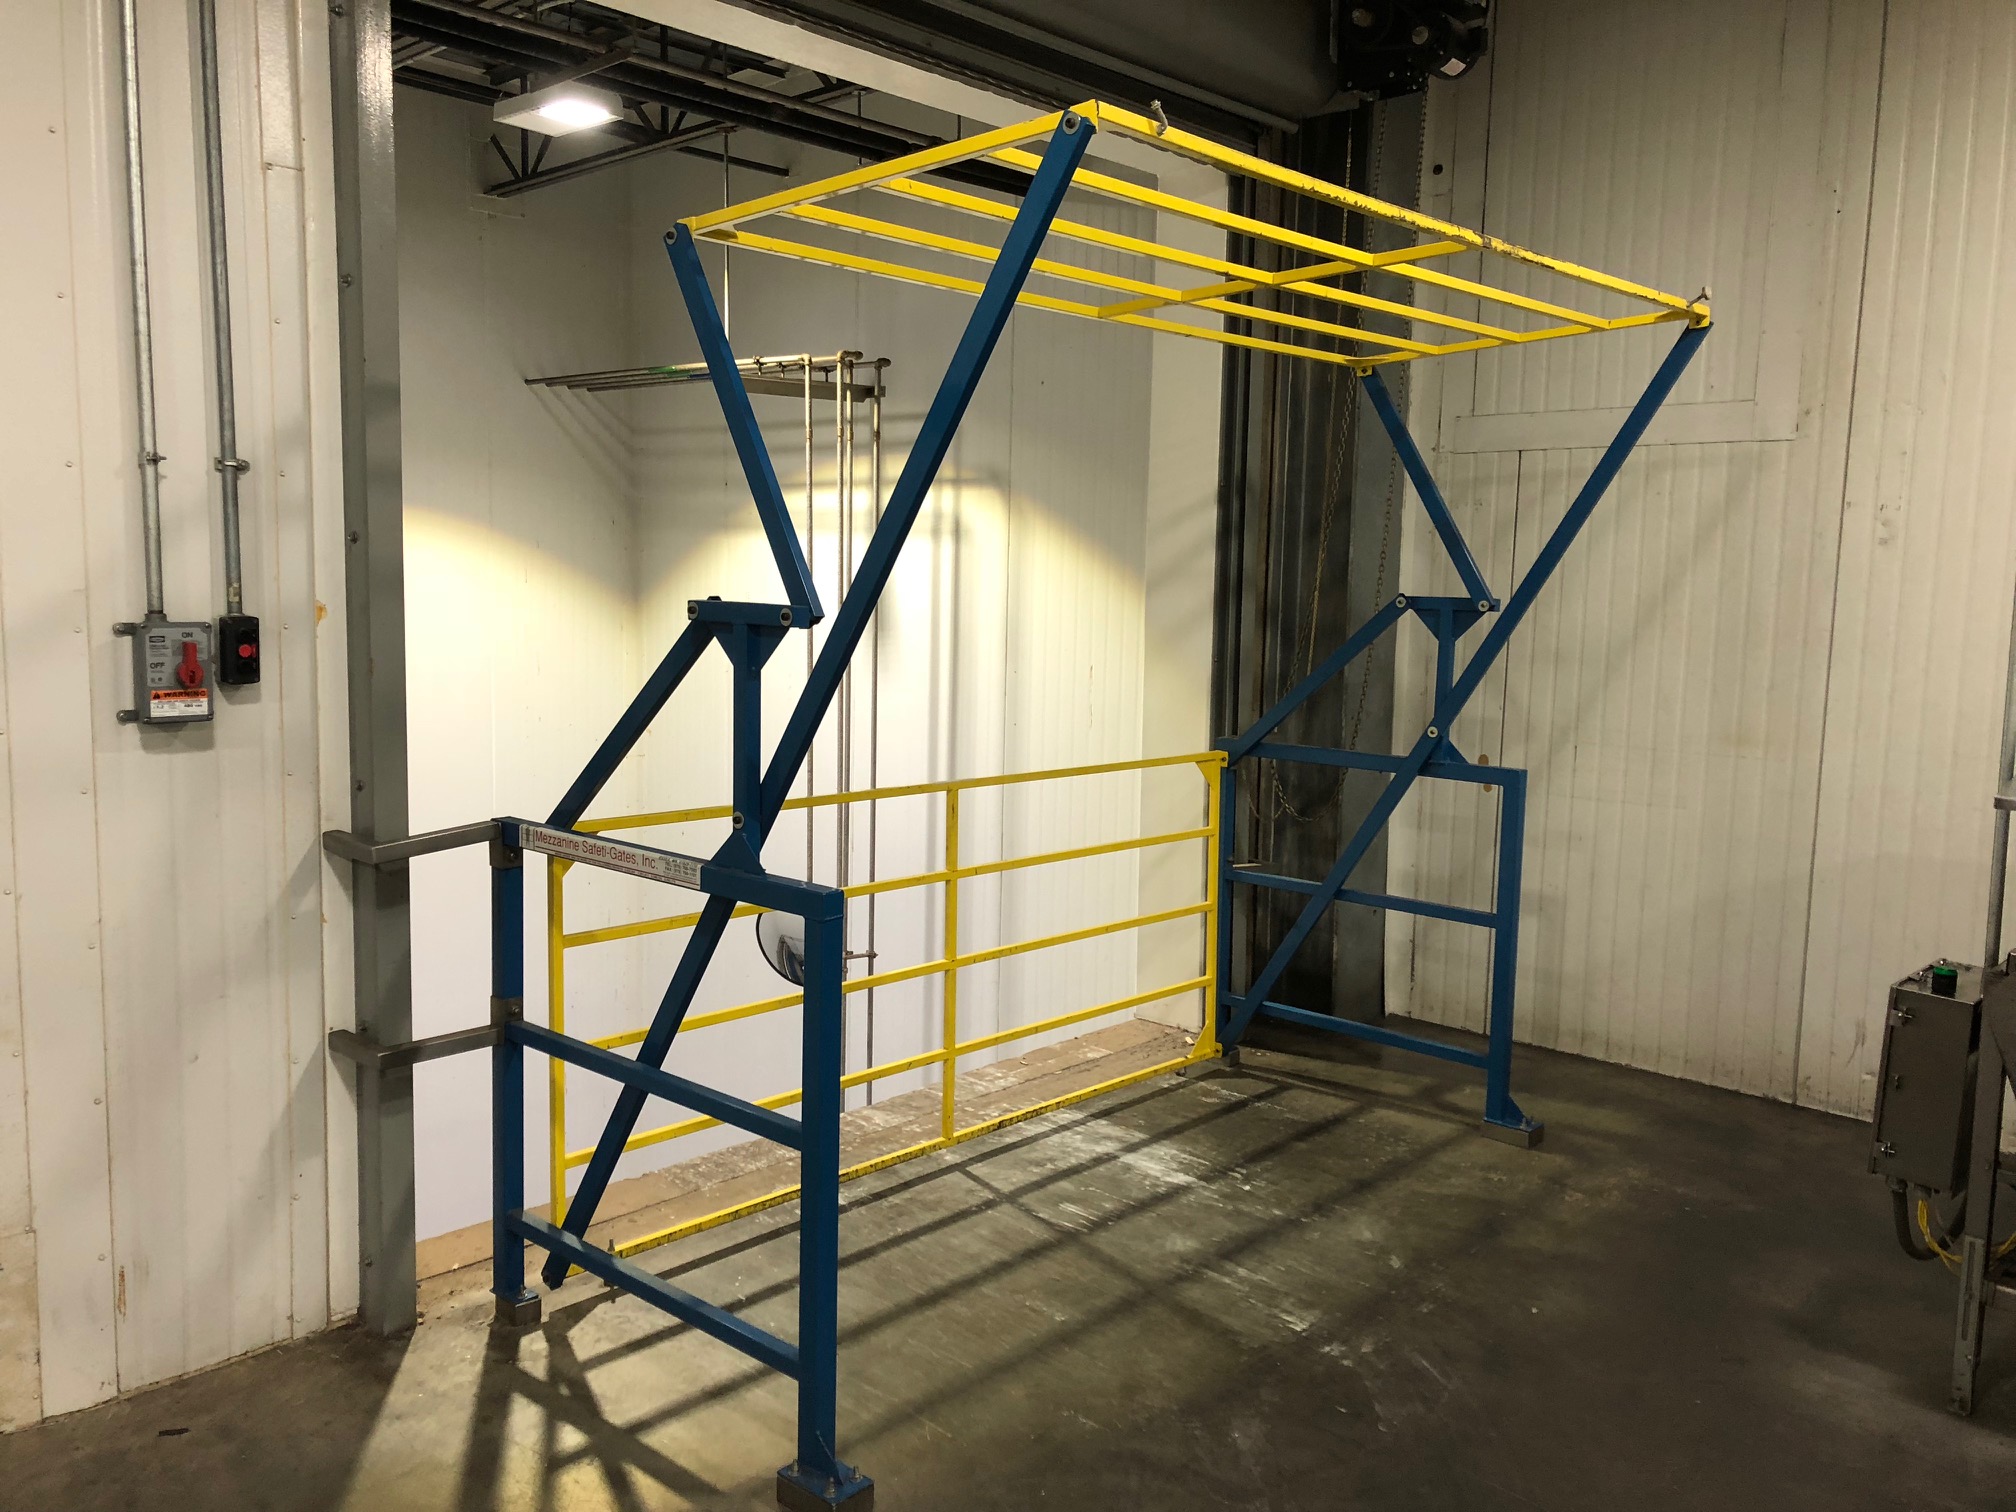 High Pallet Pivot Safety Gate for Fall Protection in Doorway